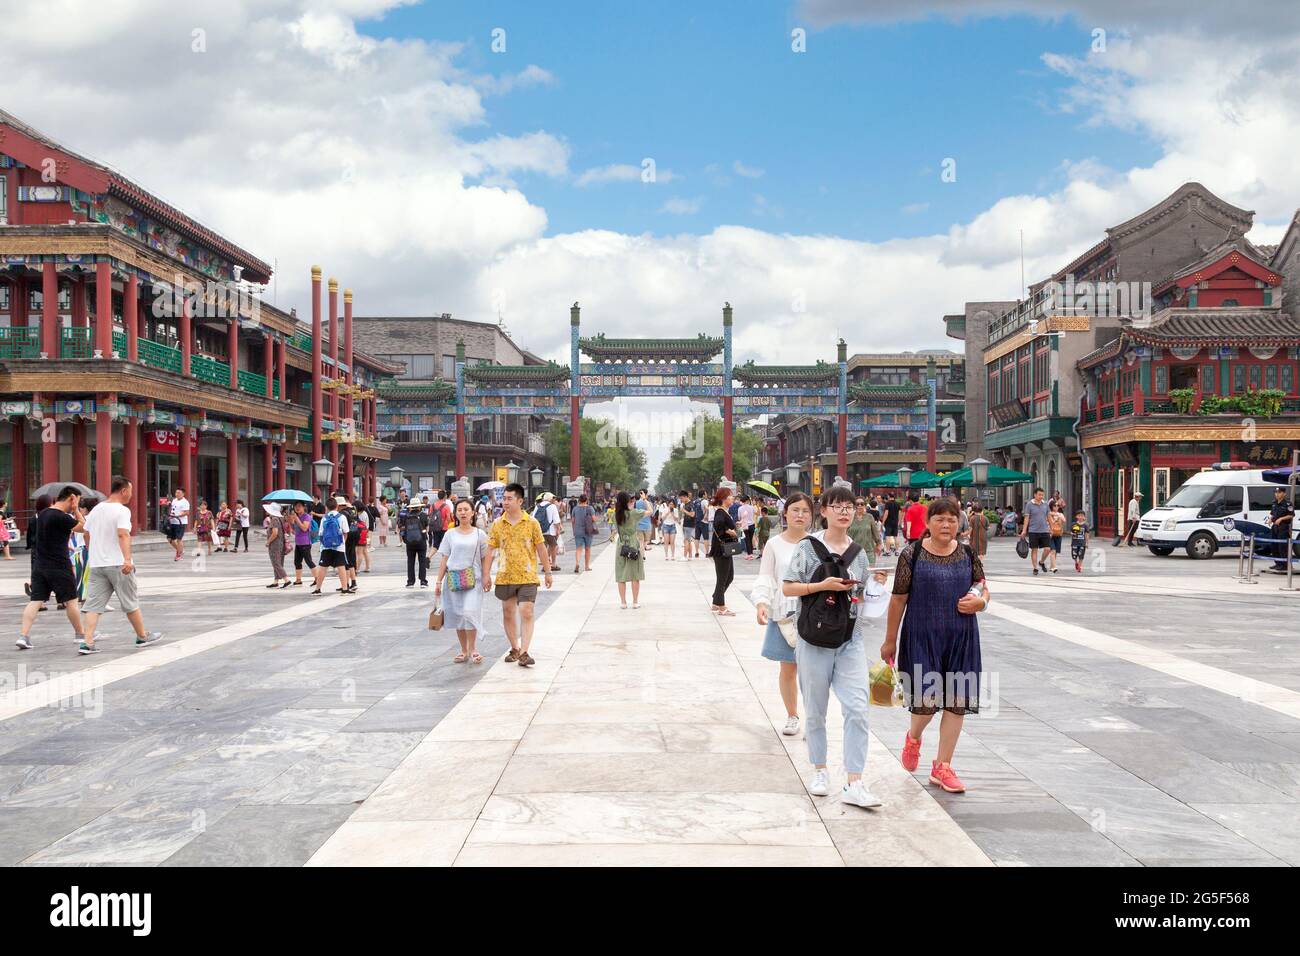 Beijing, China - August 07 2018: Zhengyang bridge at the entrance of Qianmen Avenue, a traditional commercial street outside Qianmen Gate. Stock Photo